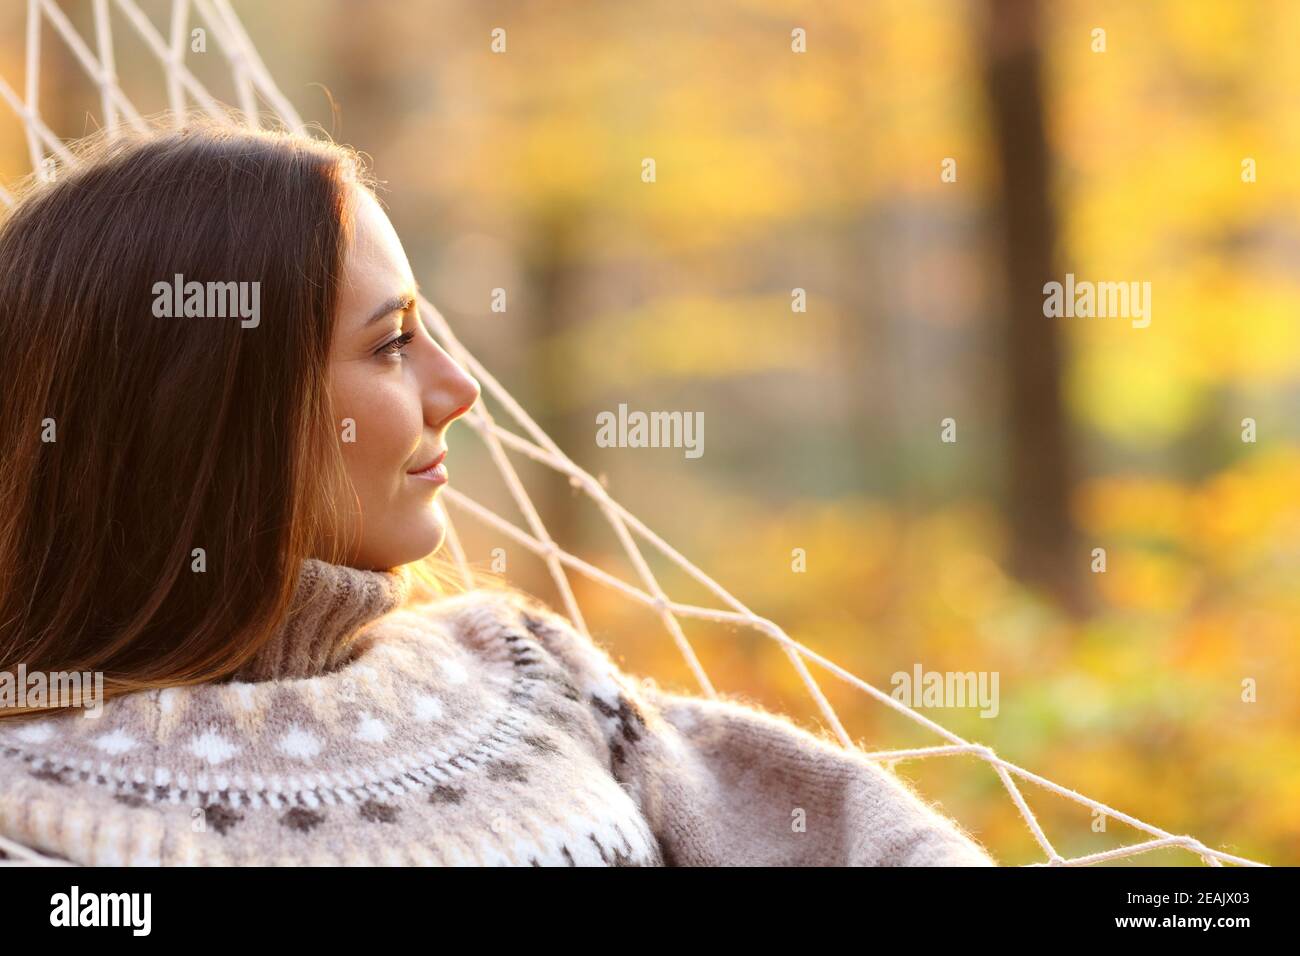 Relaxed woman contemplating on hammock in autumn Stock Photo